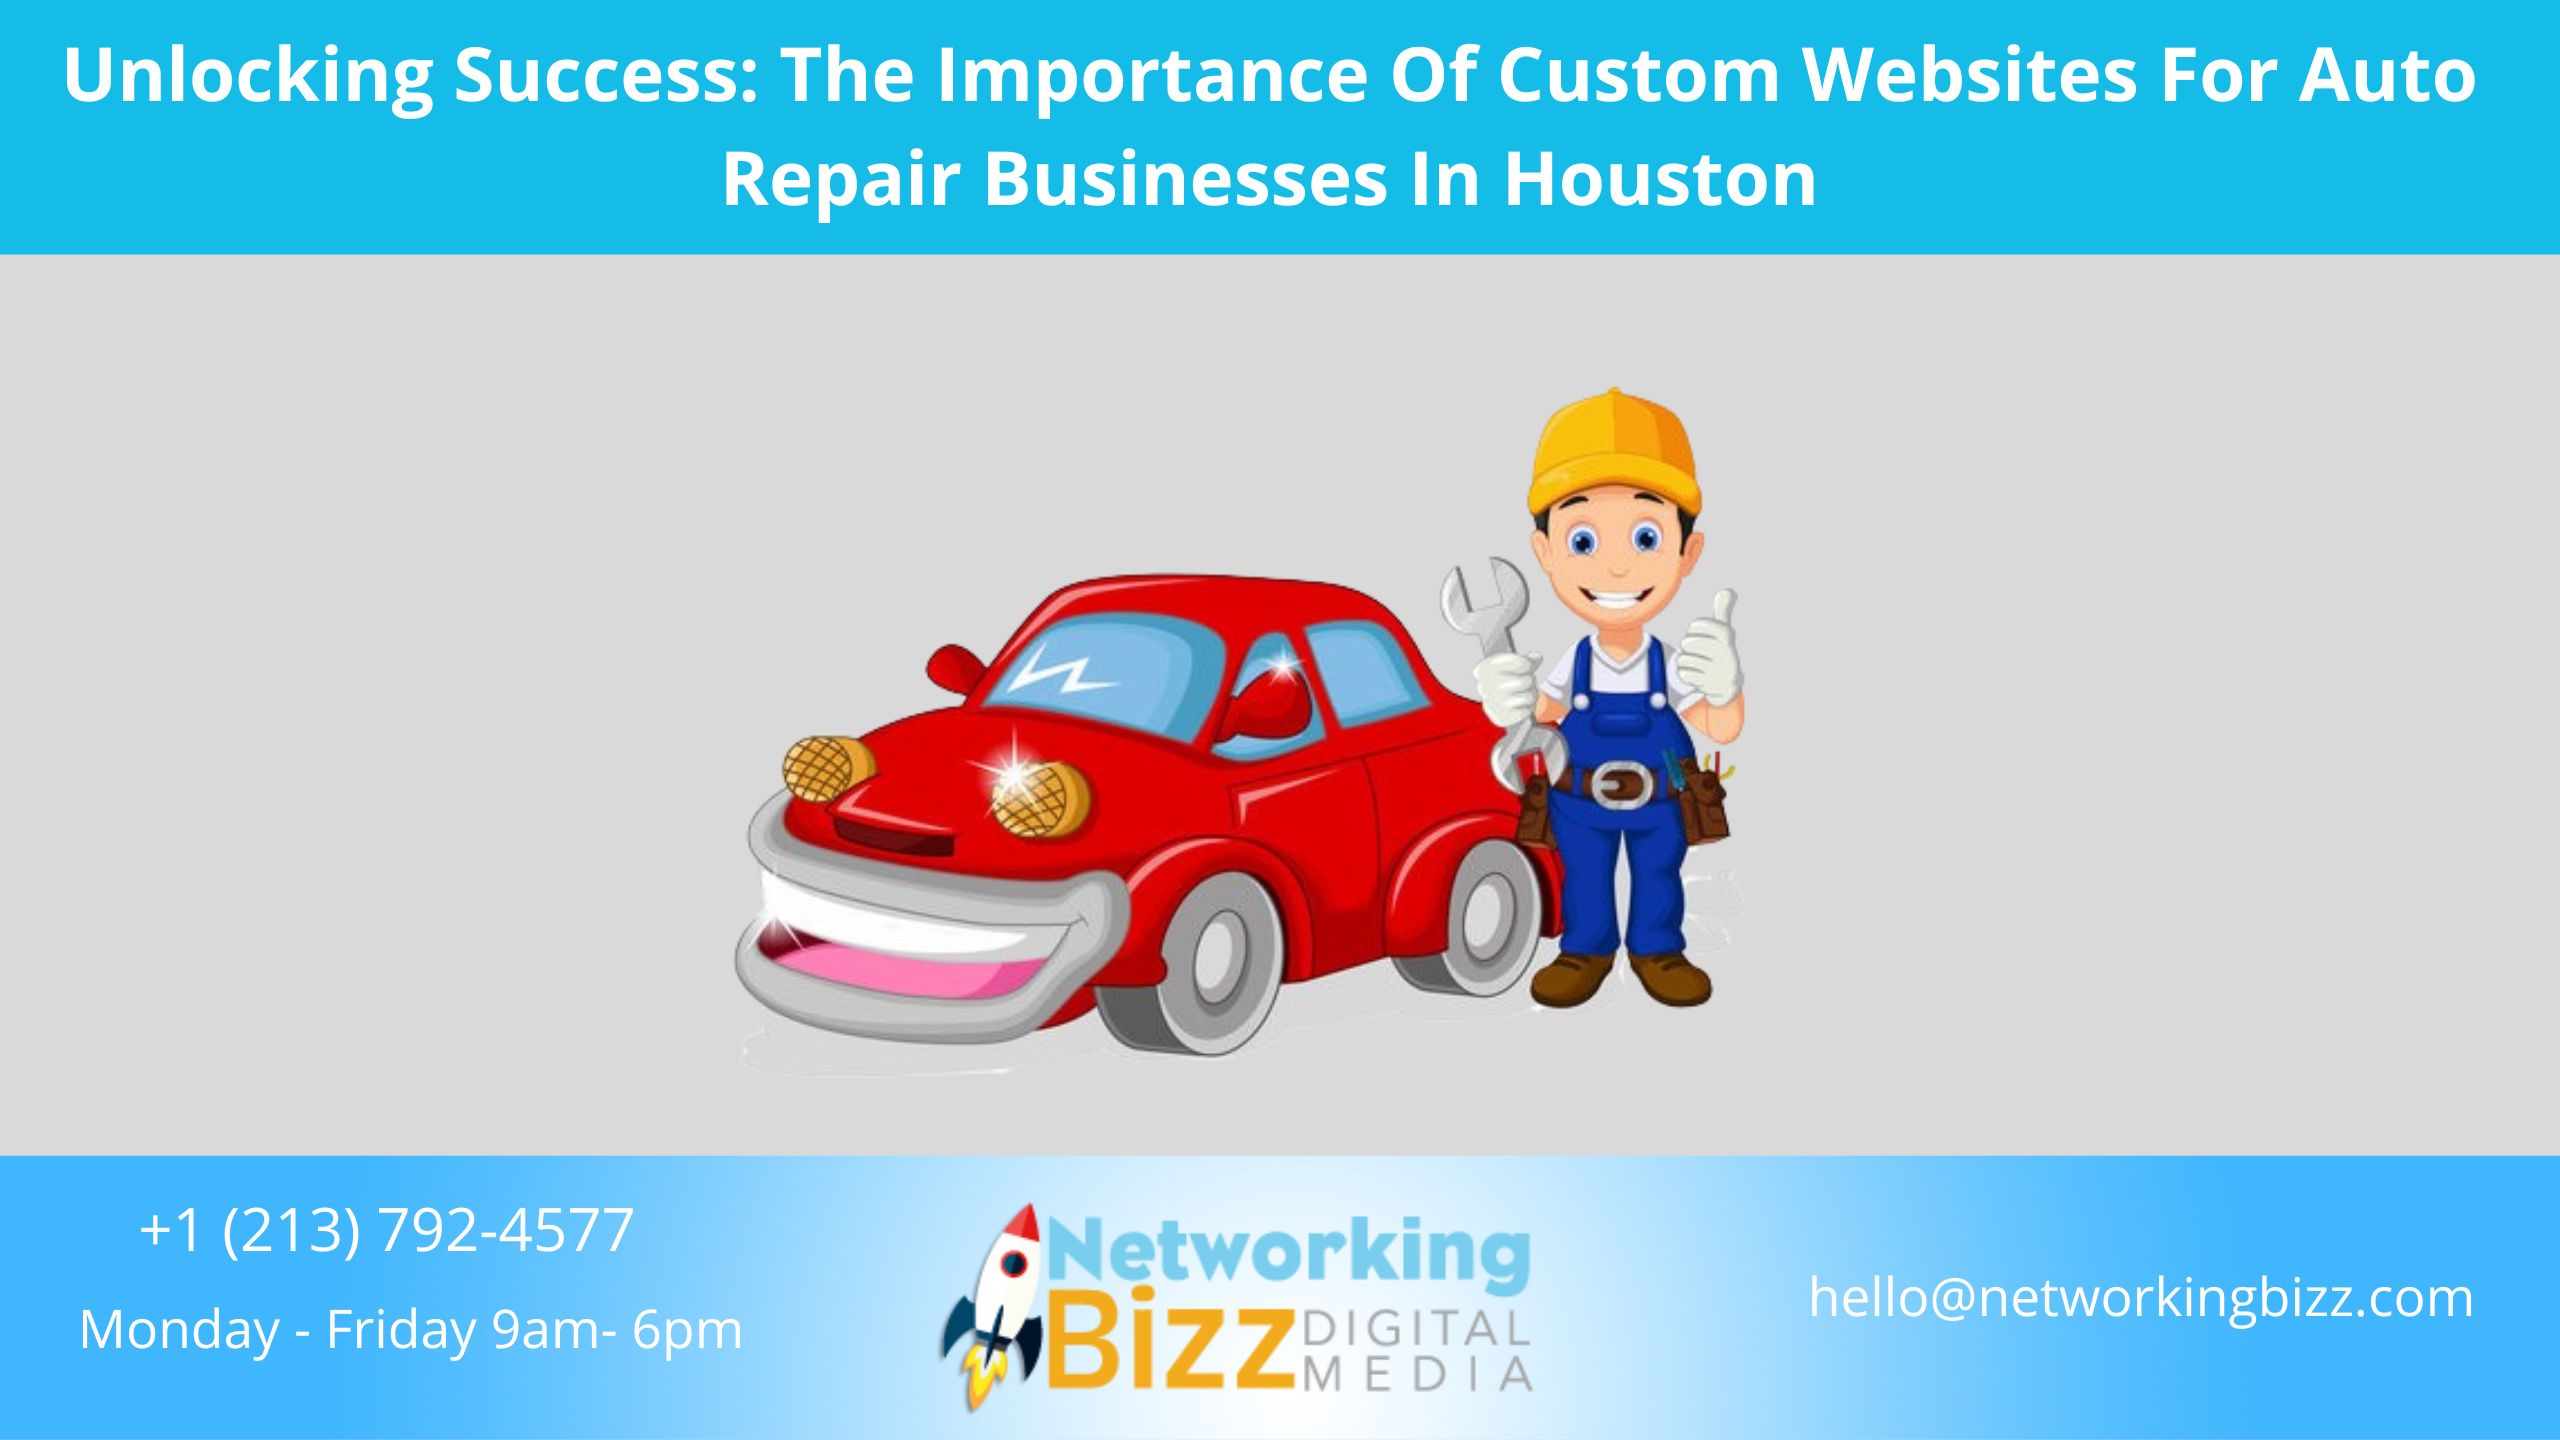 Unlocking Success: The Importance Of Custom Websites For Auto Repair Businesses In Houston